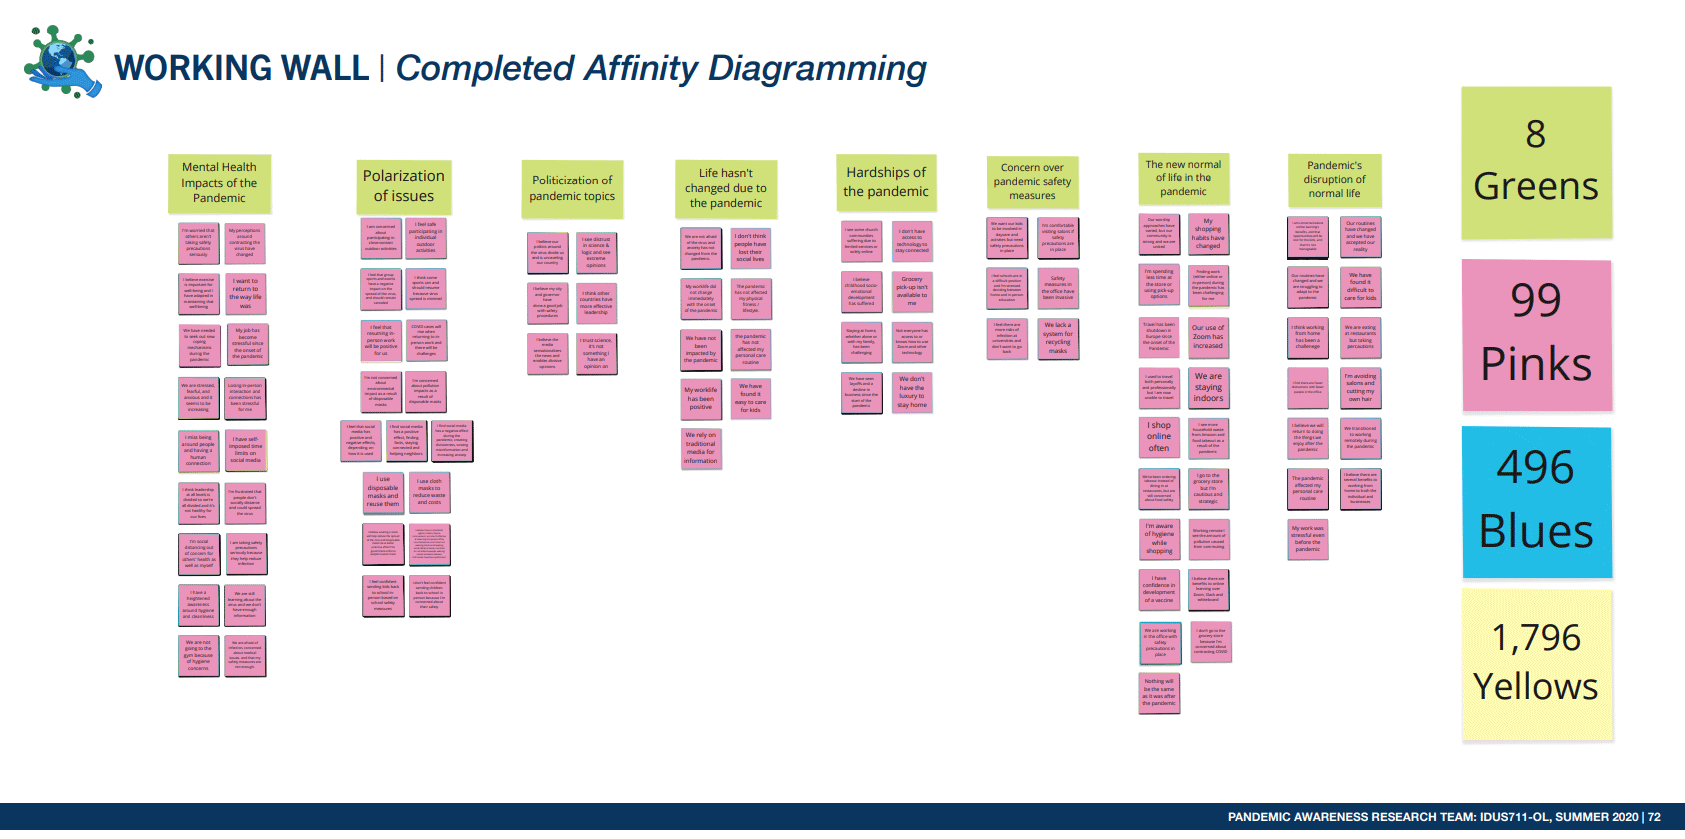 Completed affinity diagramming